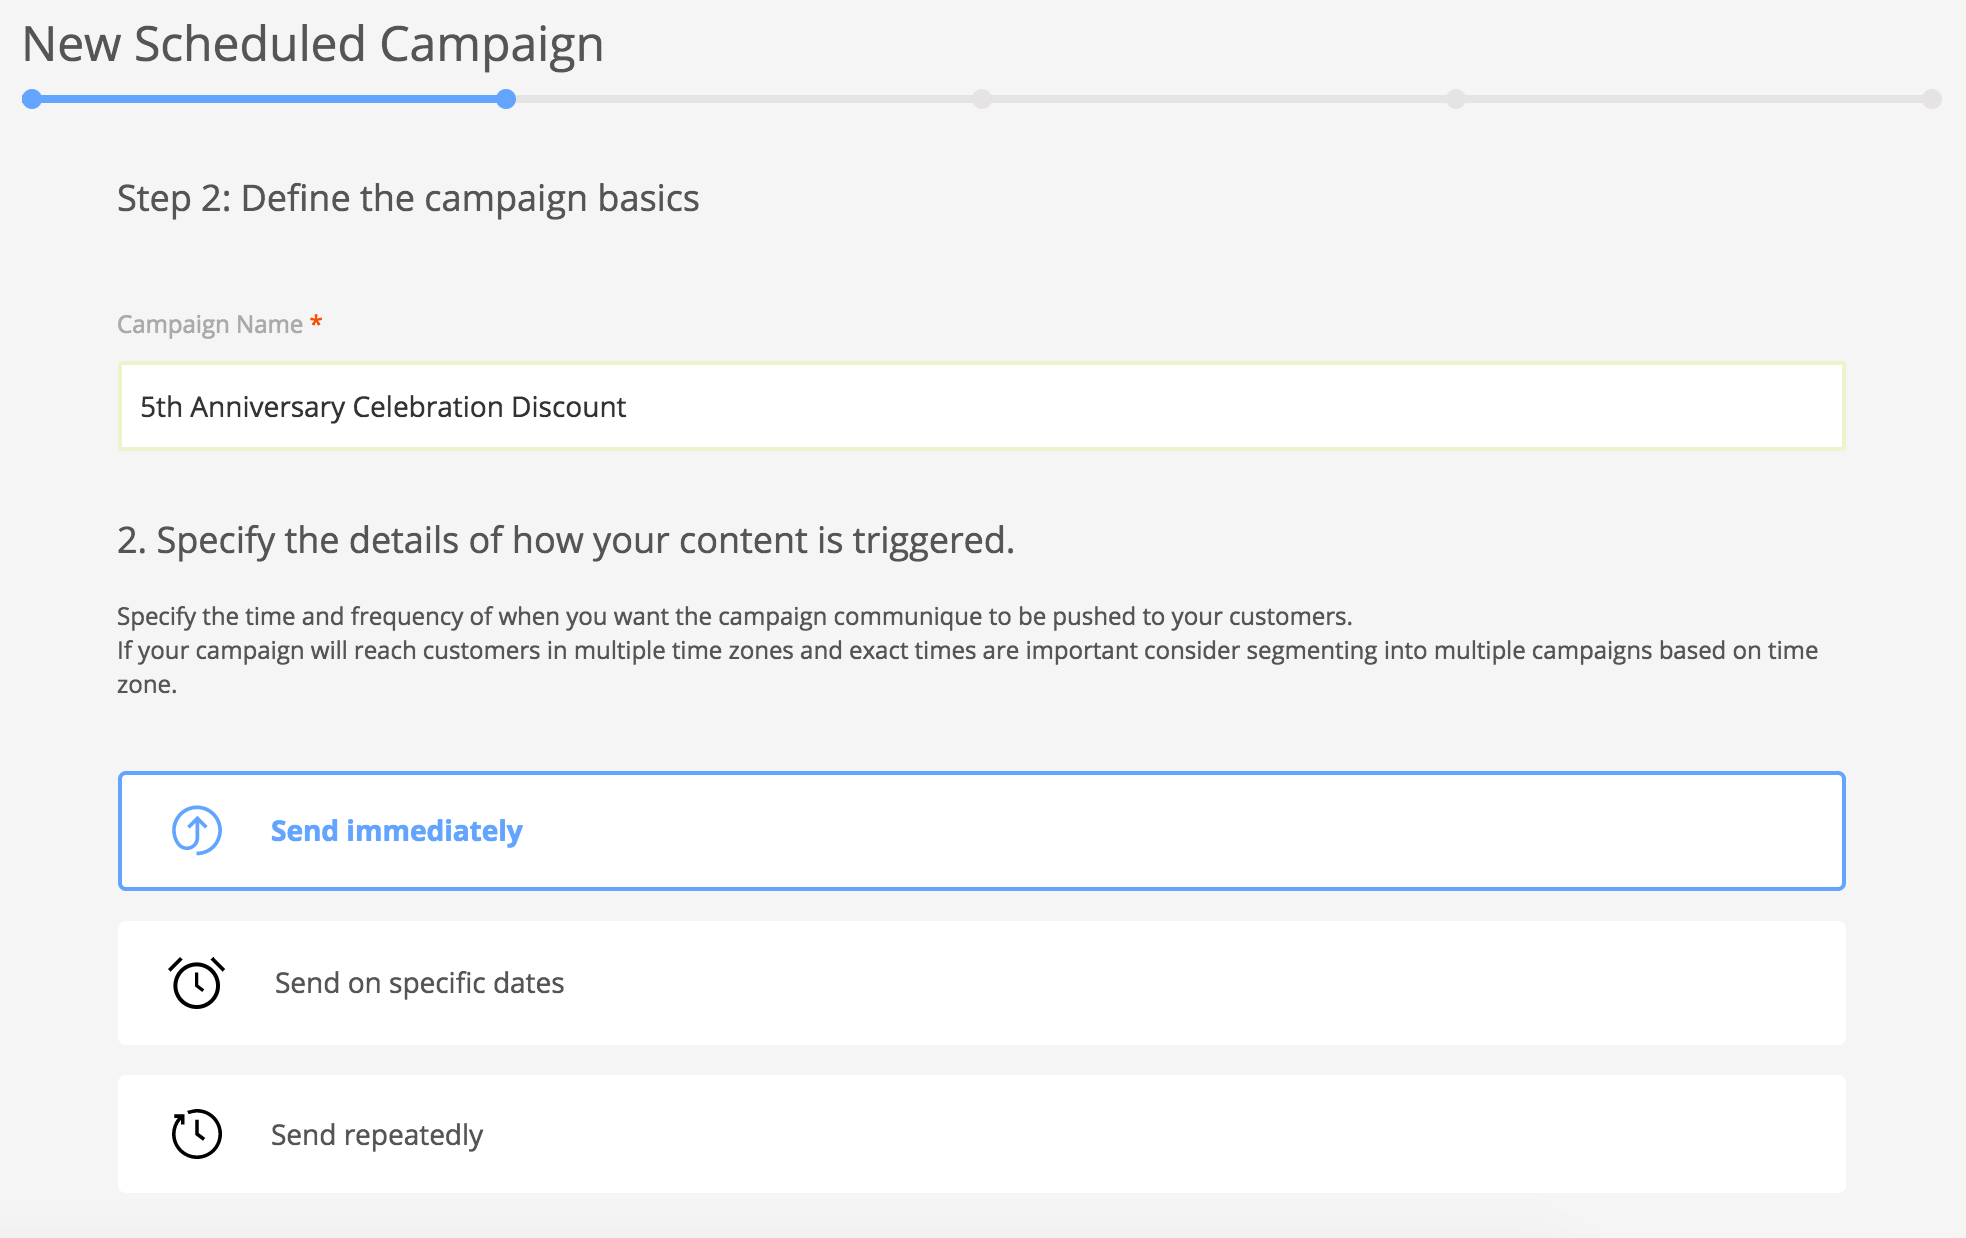 Create Campaign Step 2 (Details)